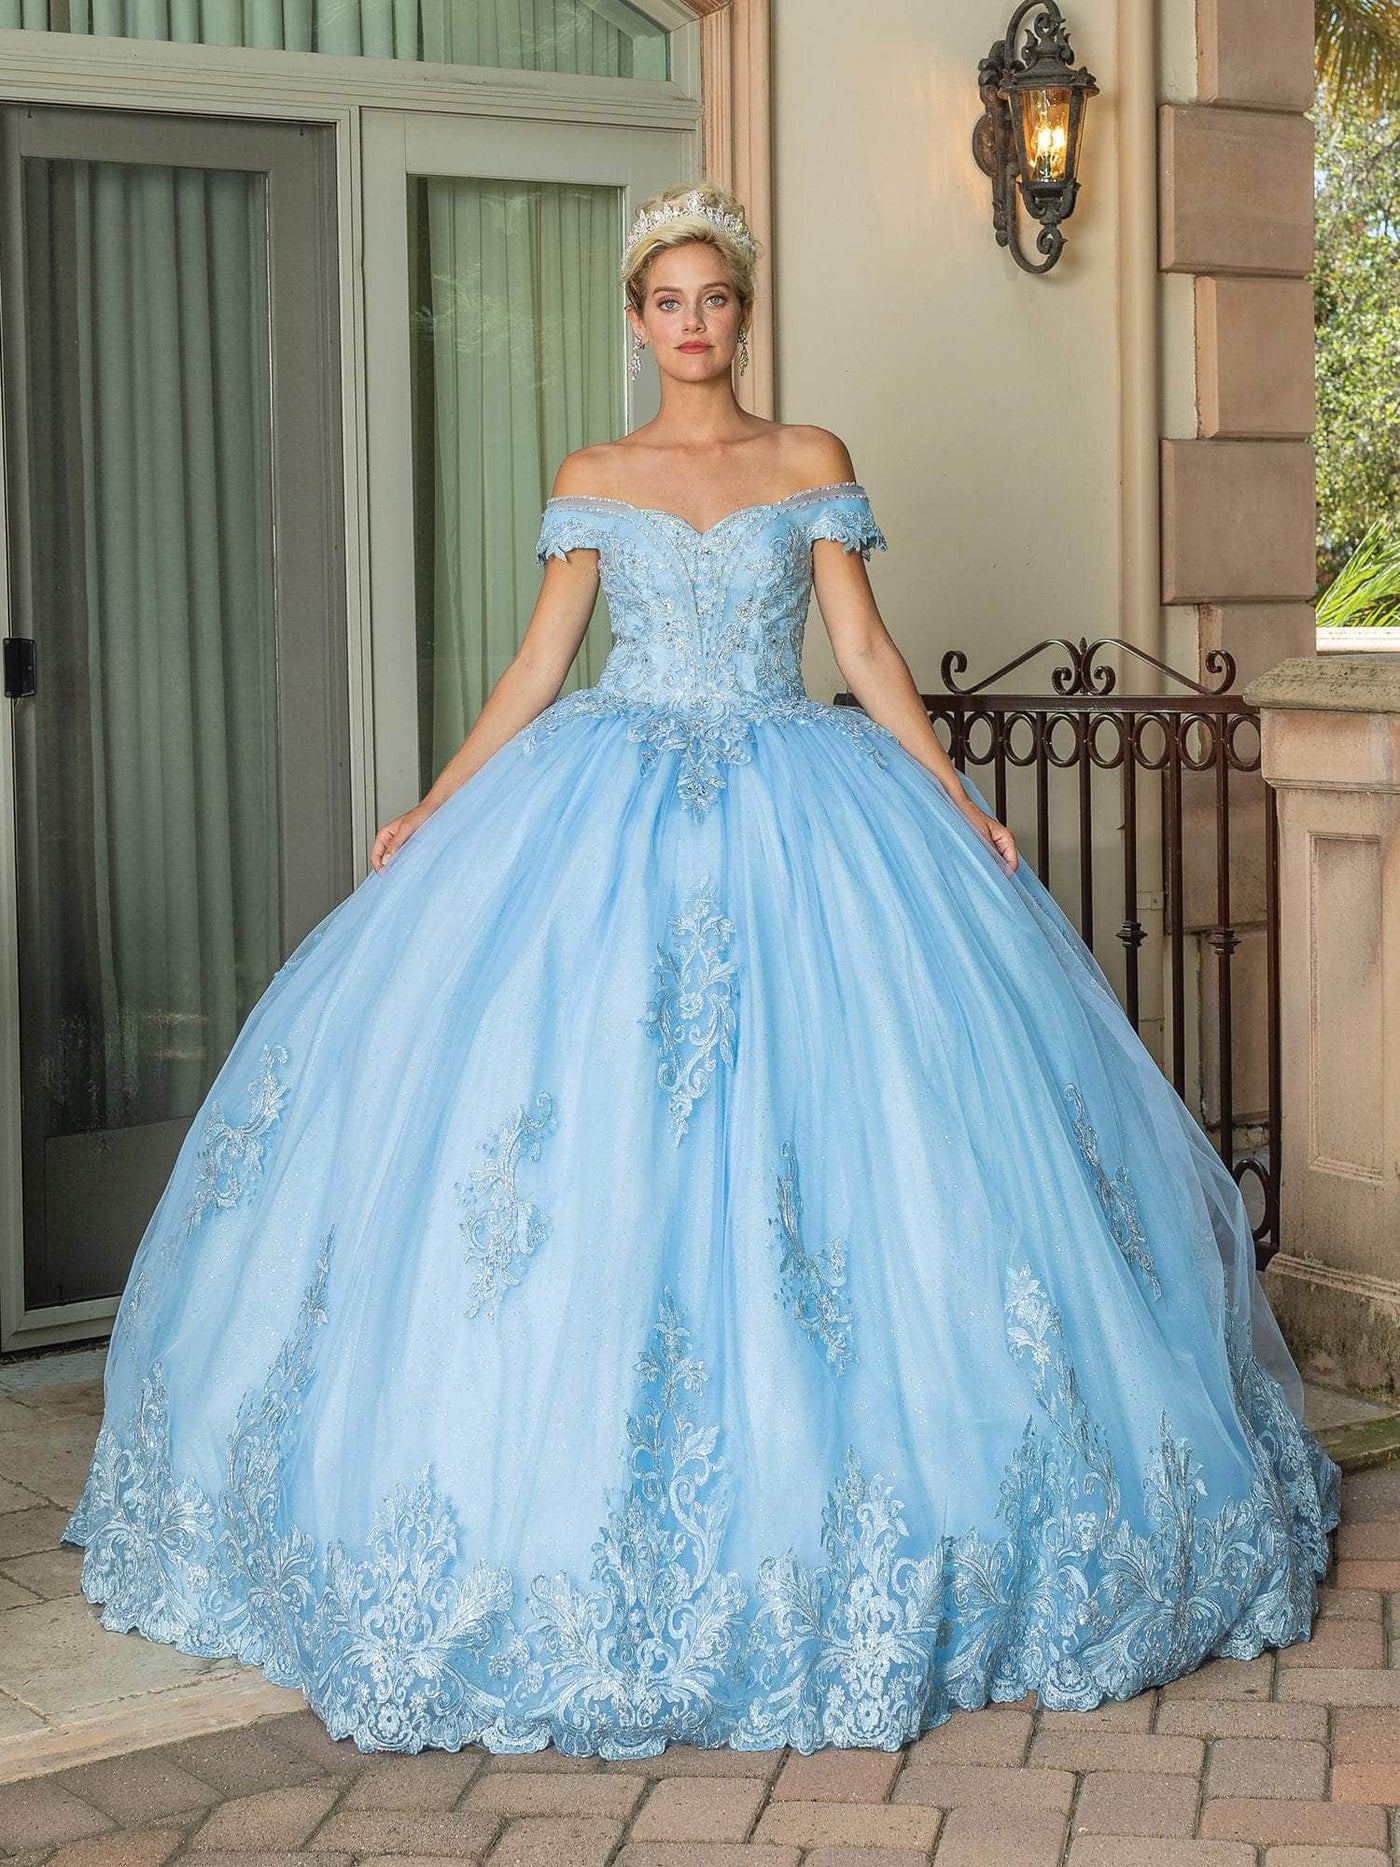 Dancing Queen 1699 - Lace Detail Quinceanera Ballgown Special Occasion Dress